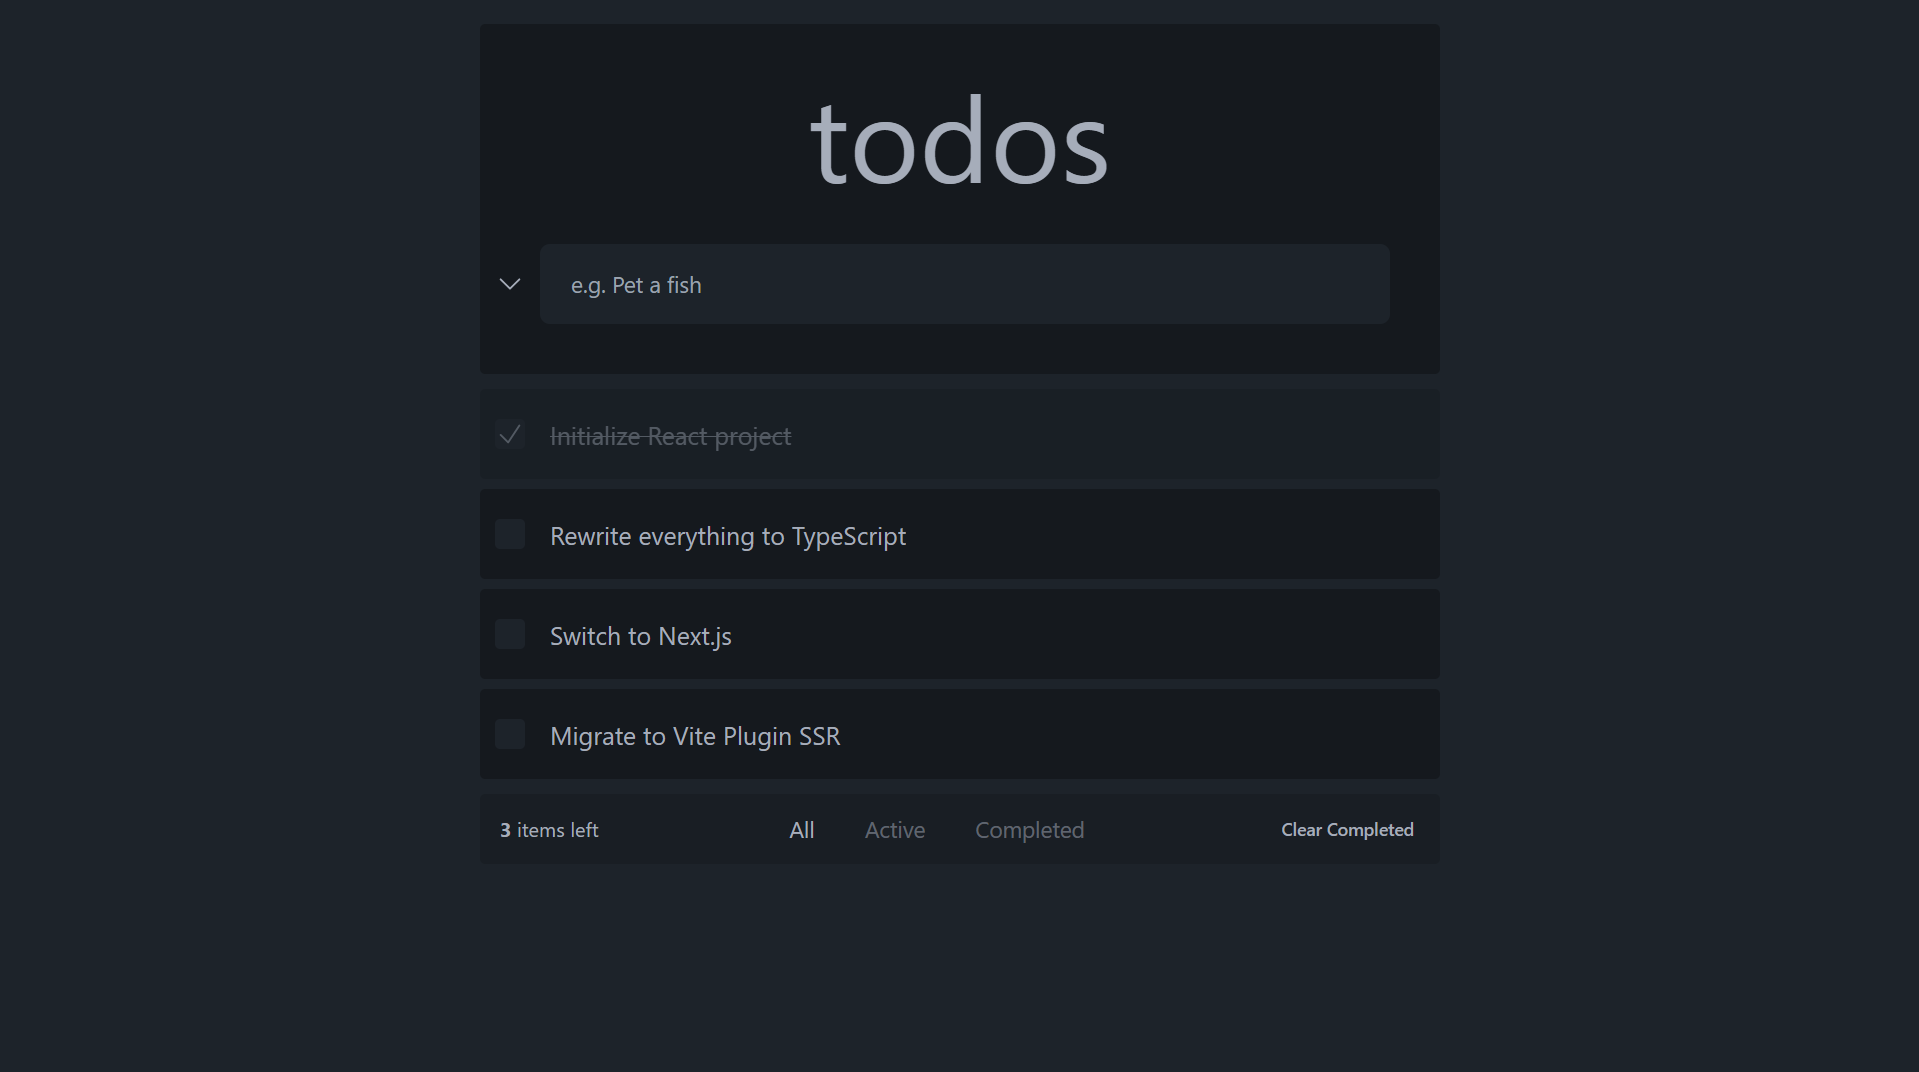 A screenshot of the TodoMVC app implemented with the framework